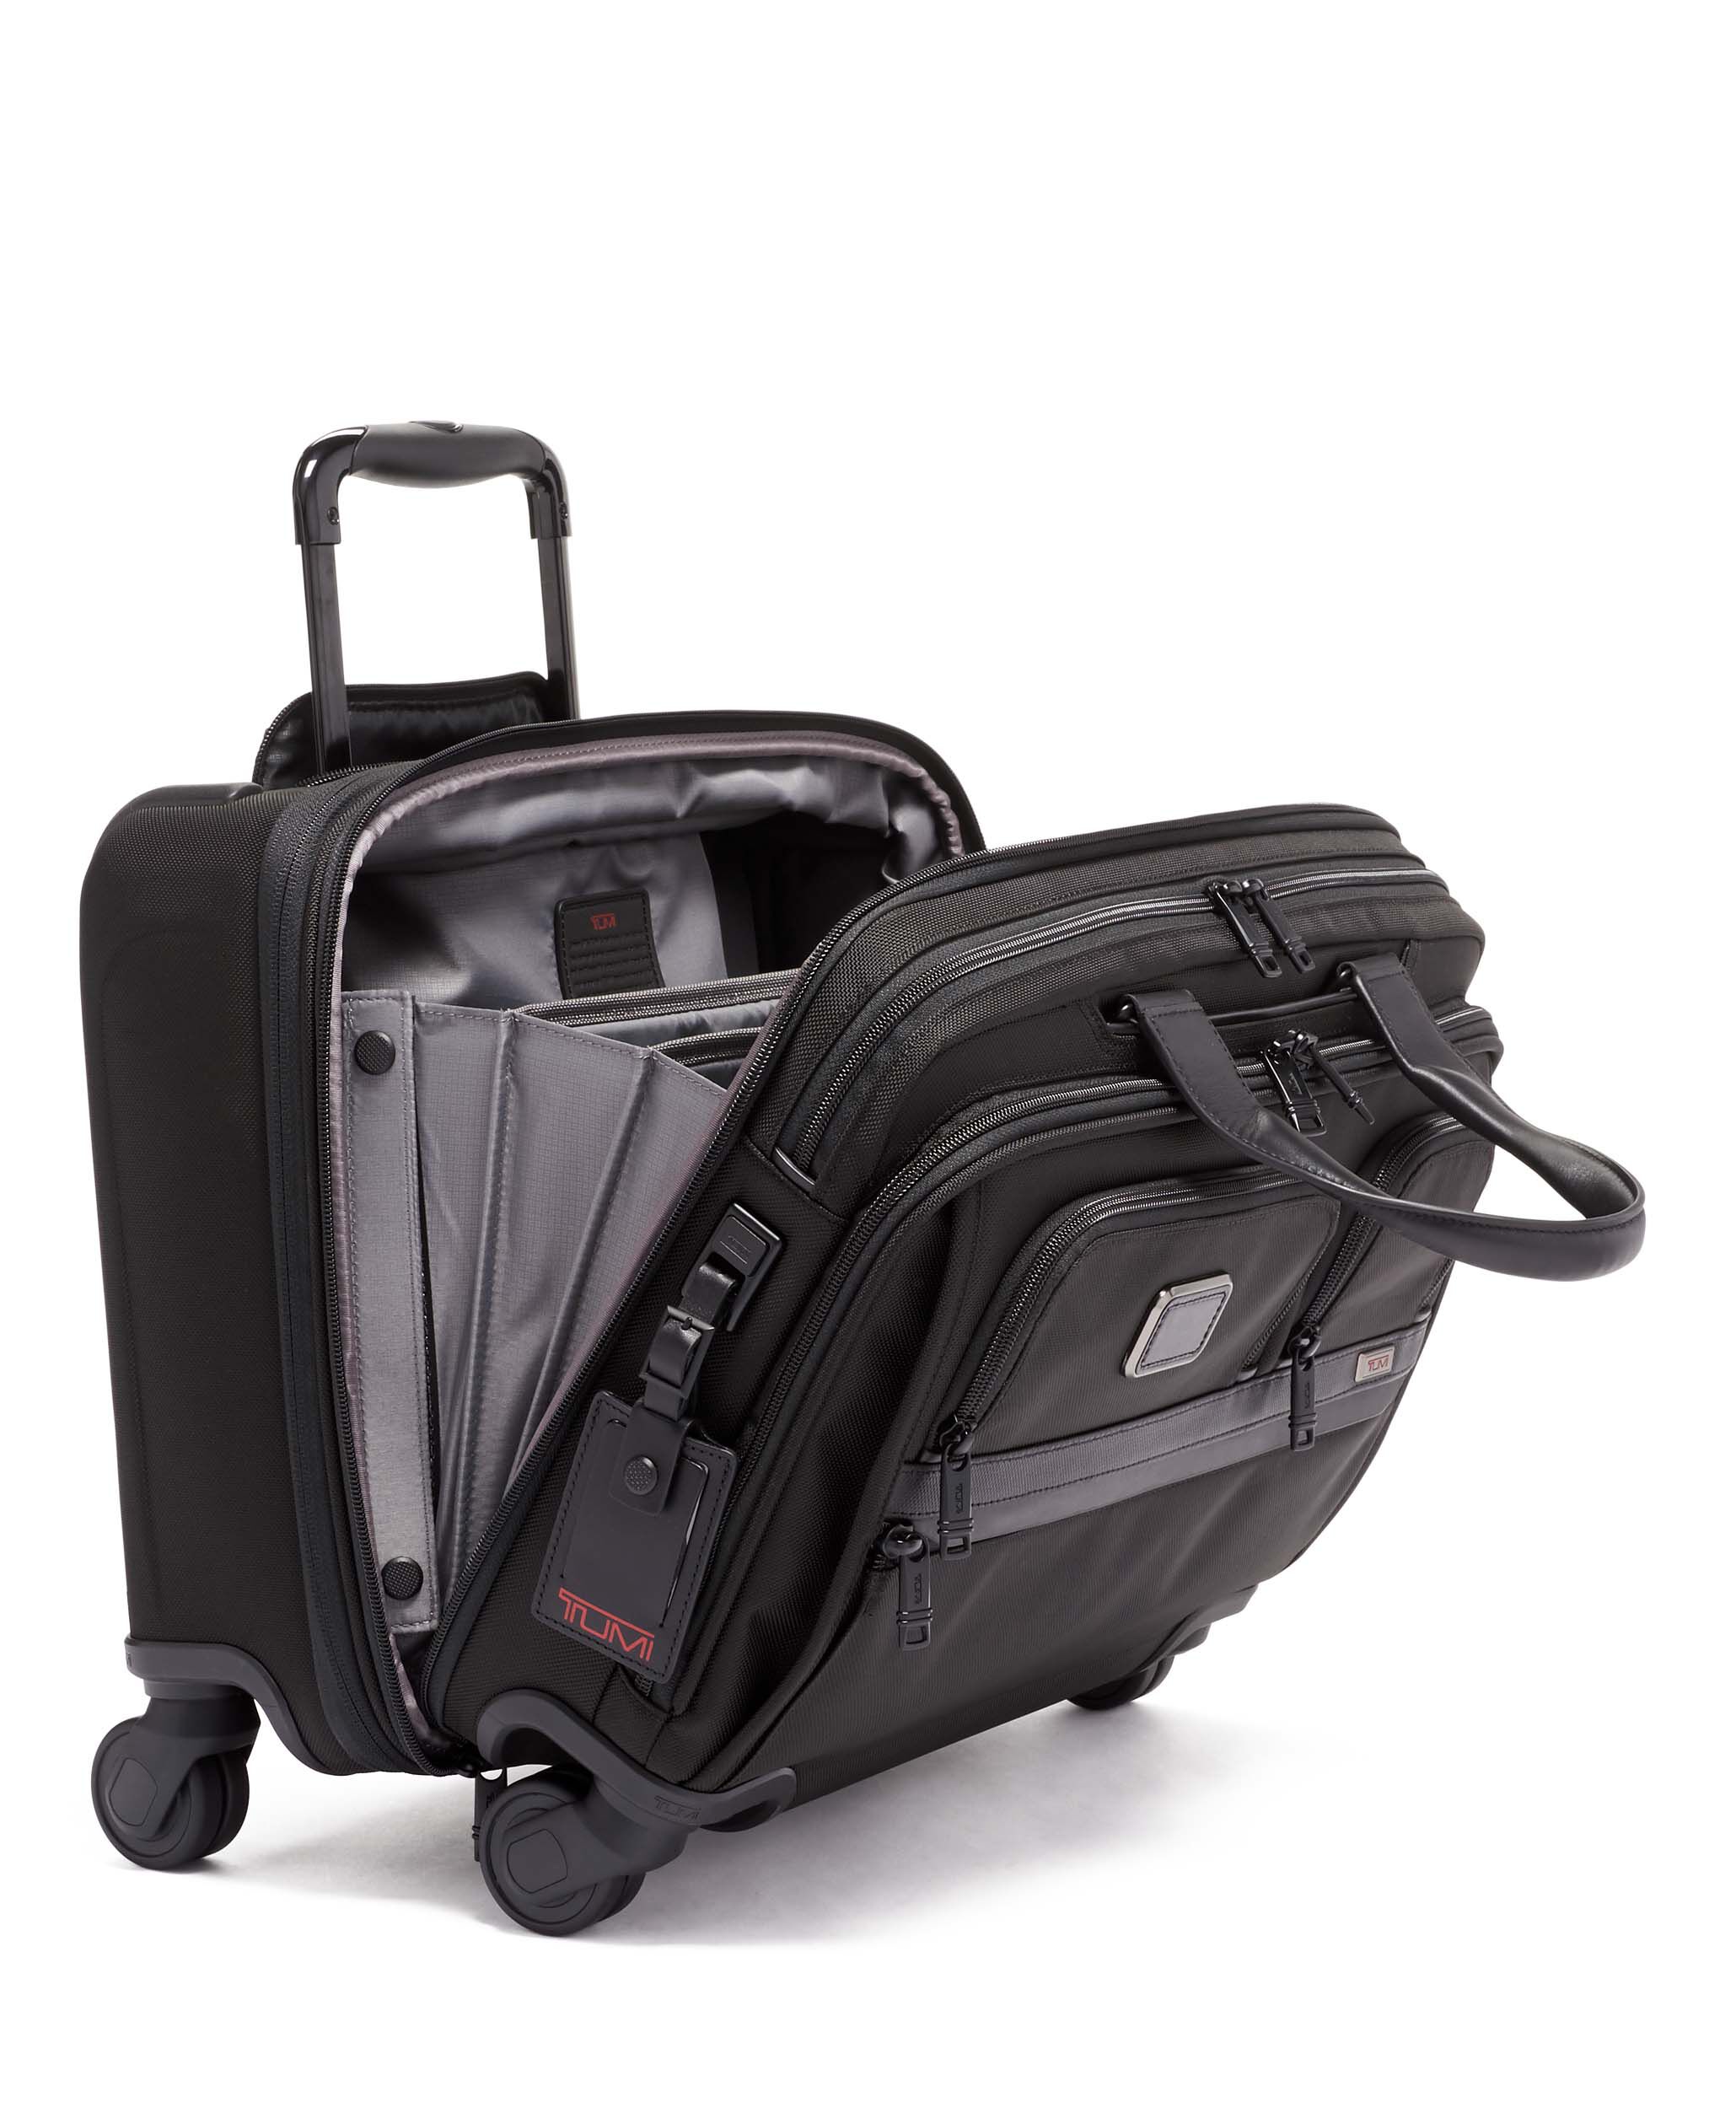 Compact Carry-On Luggage | TUMI